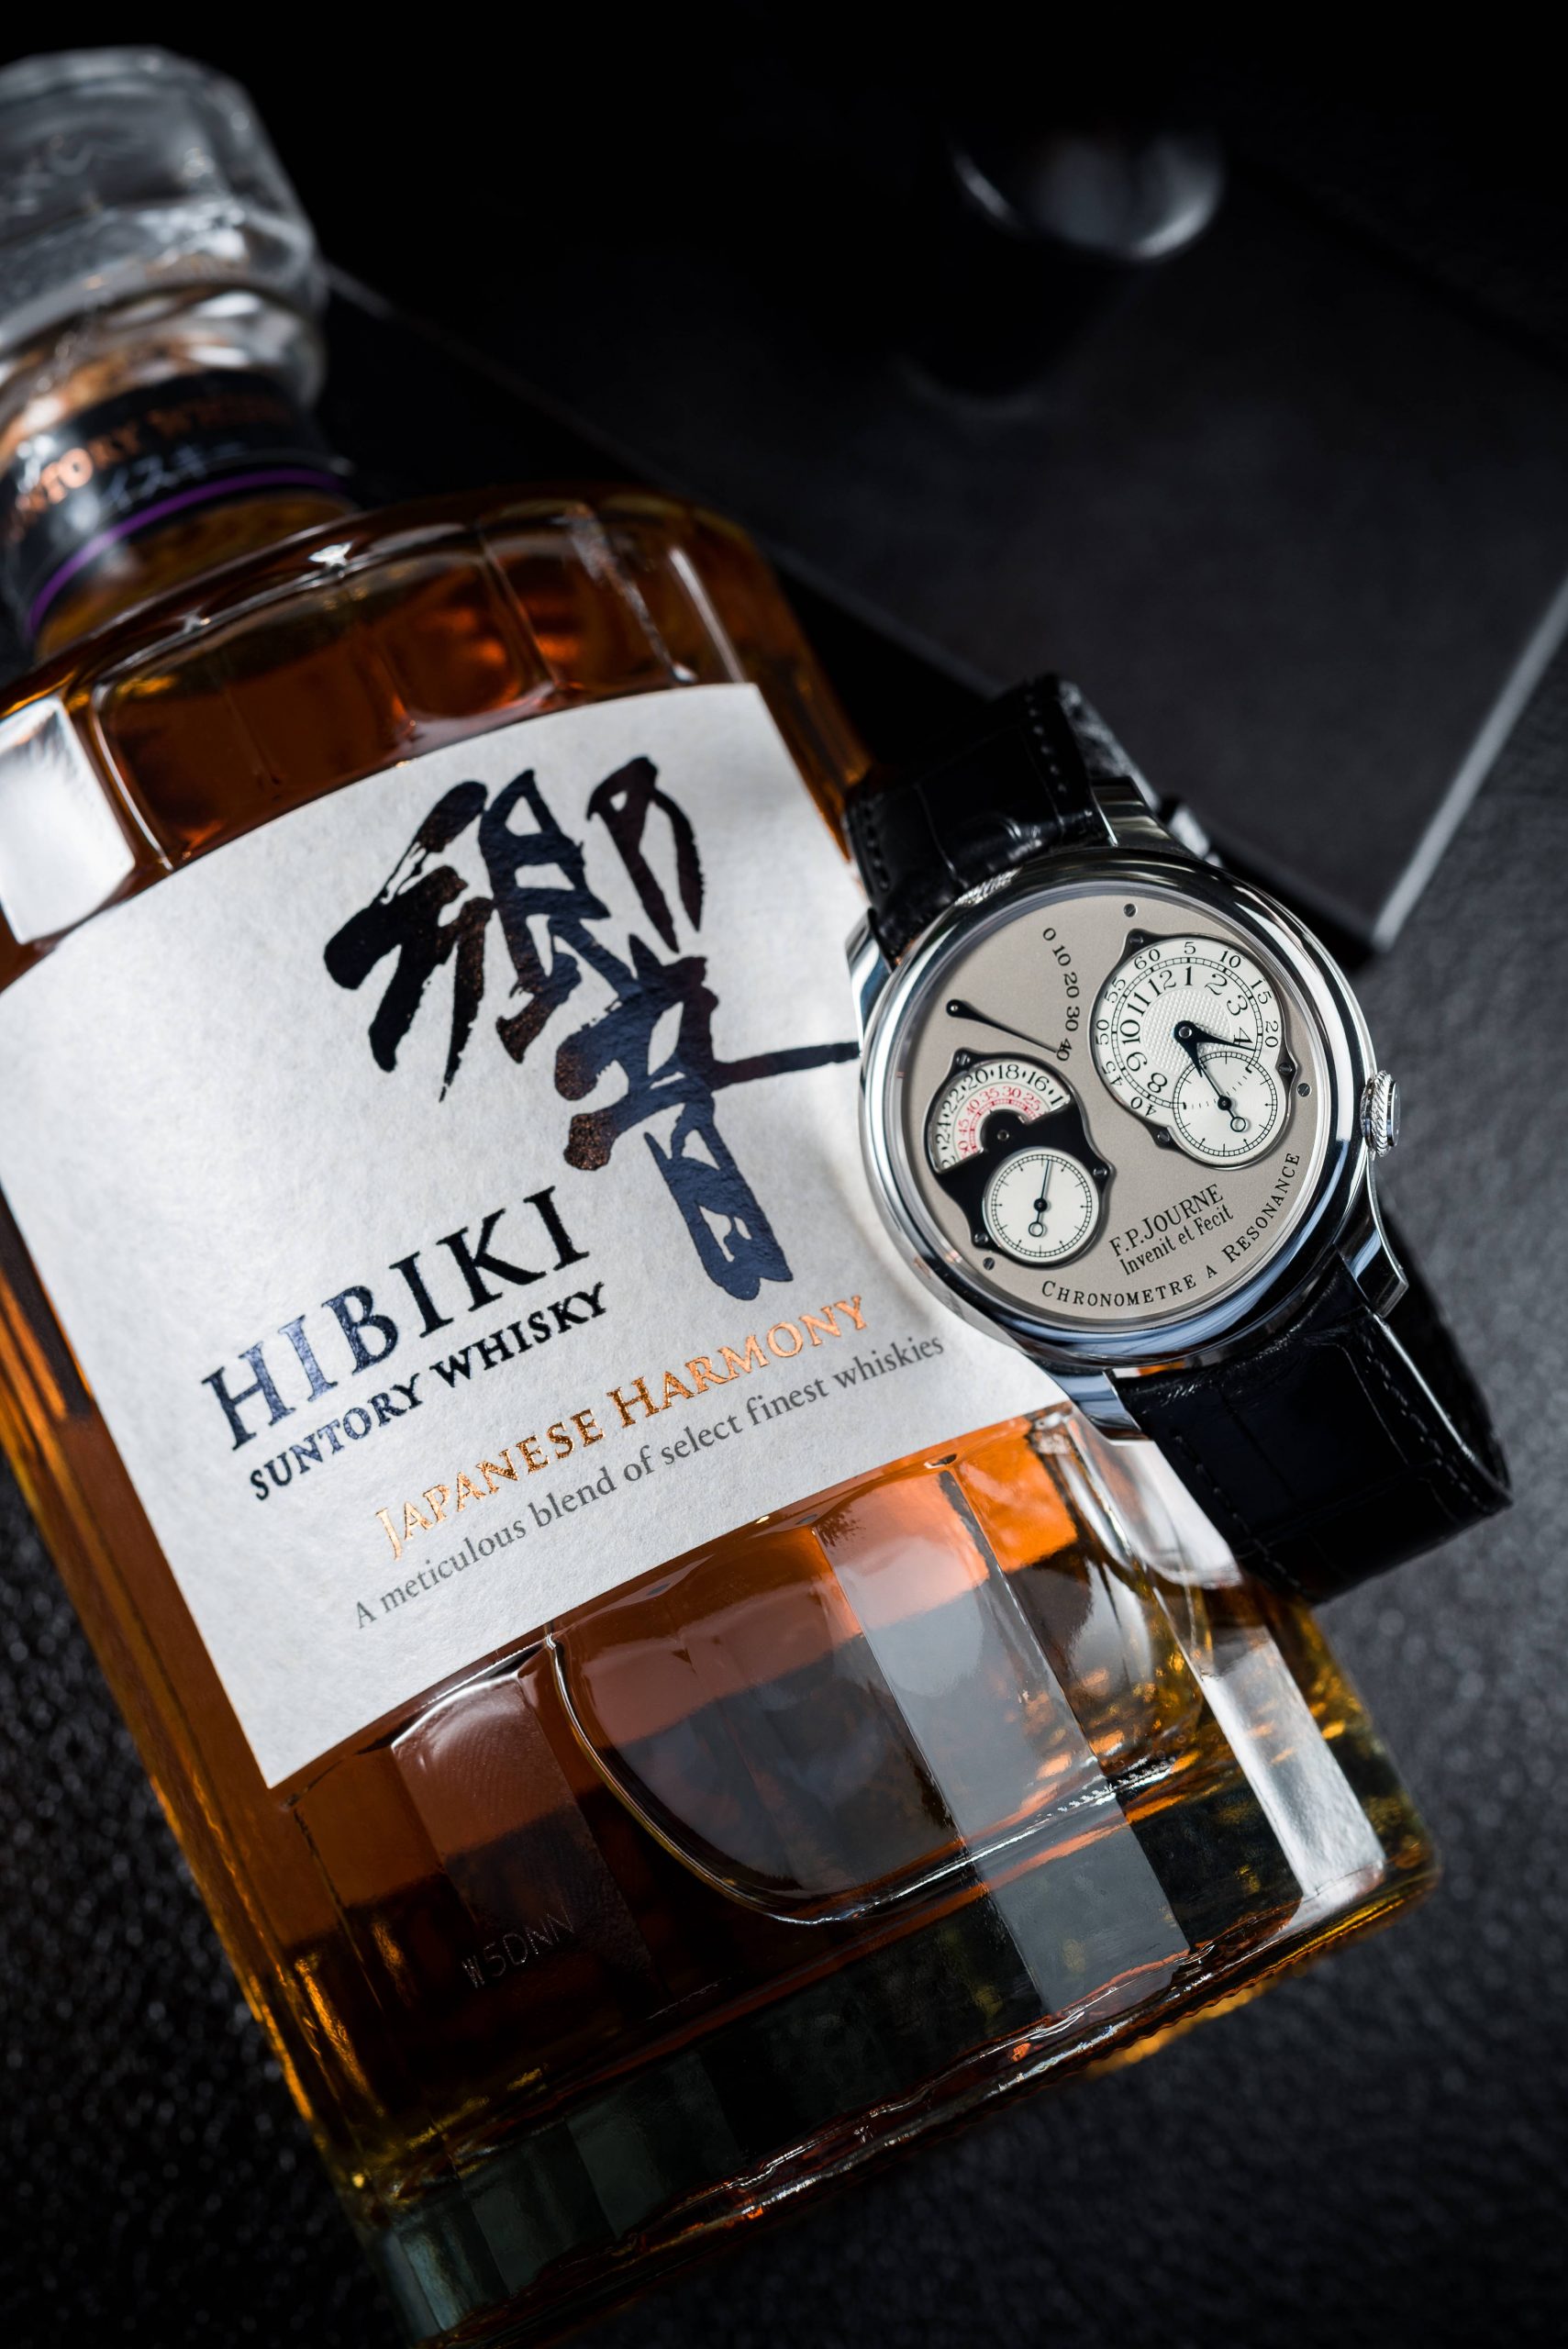 Watches And Whisky: F.P. Journe And The Hibiki Japanese Harmony